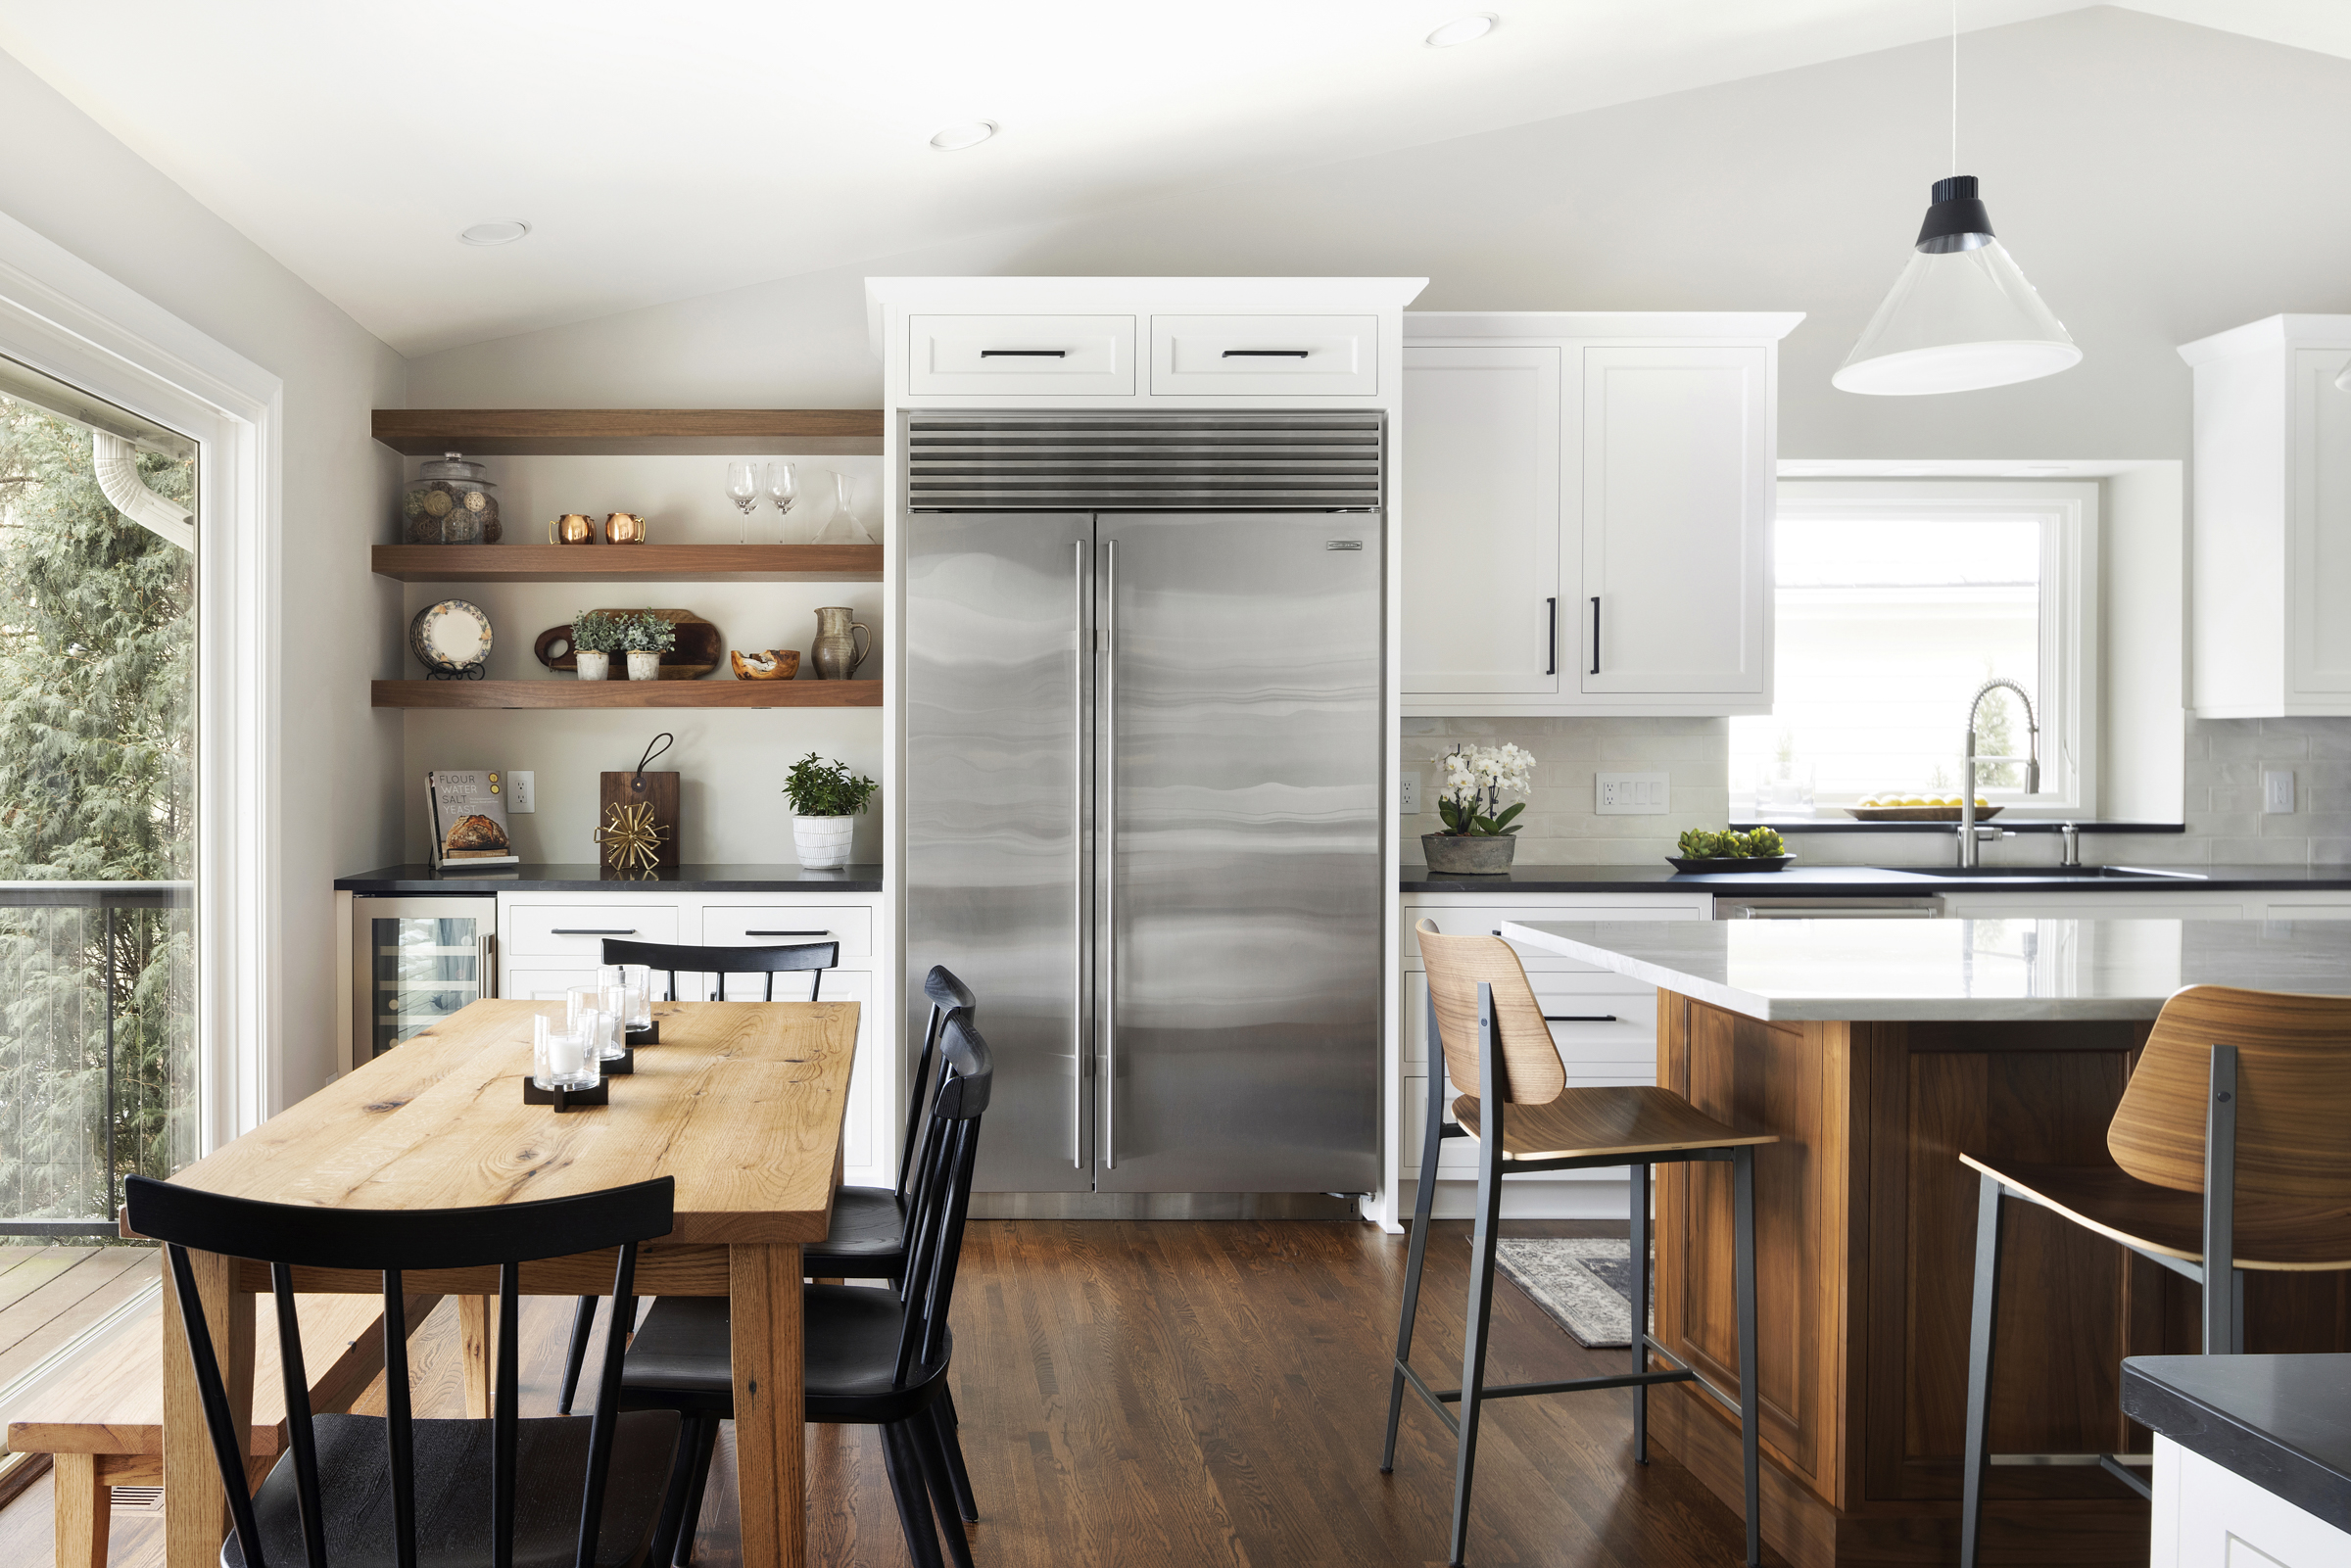 Kitchen with wood tones and white kitchen with stainless steel refrigerator